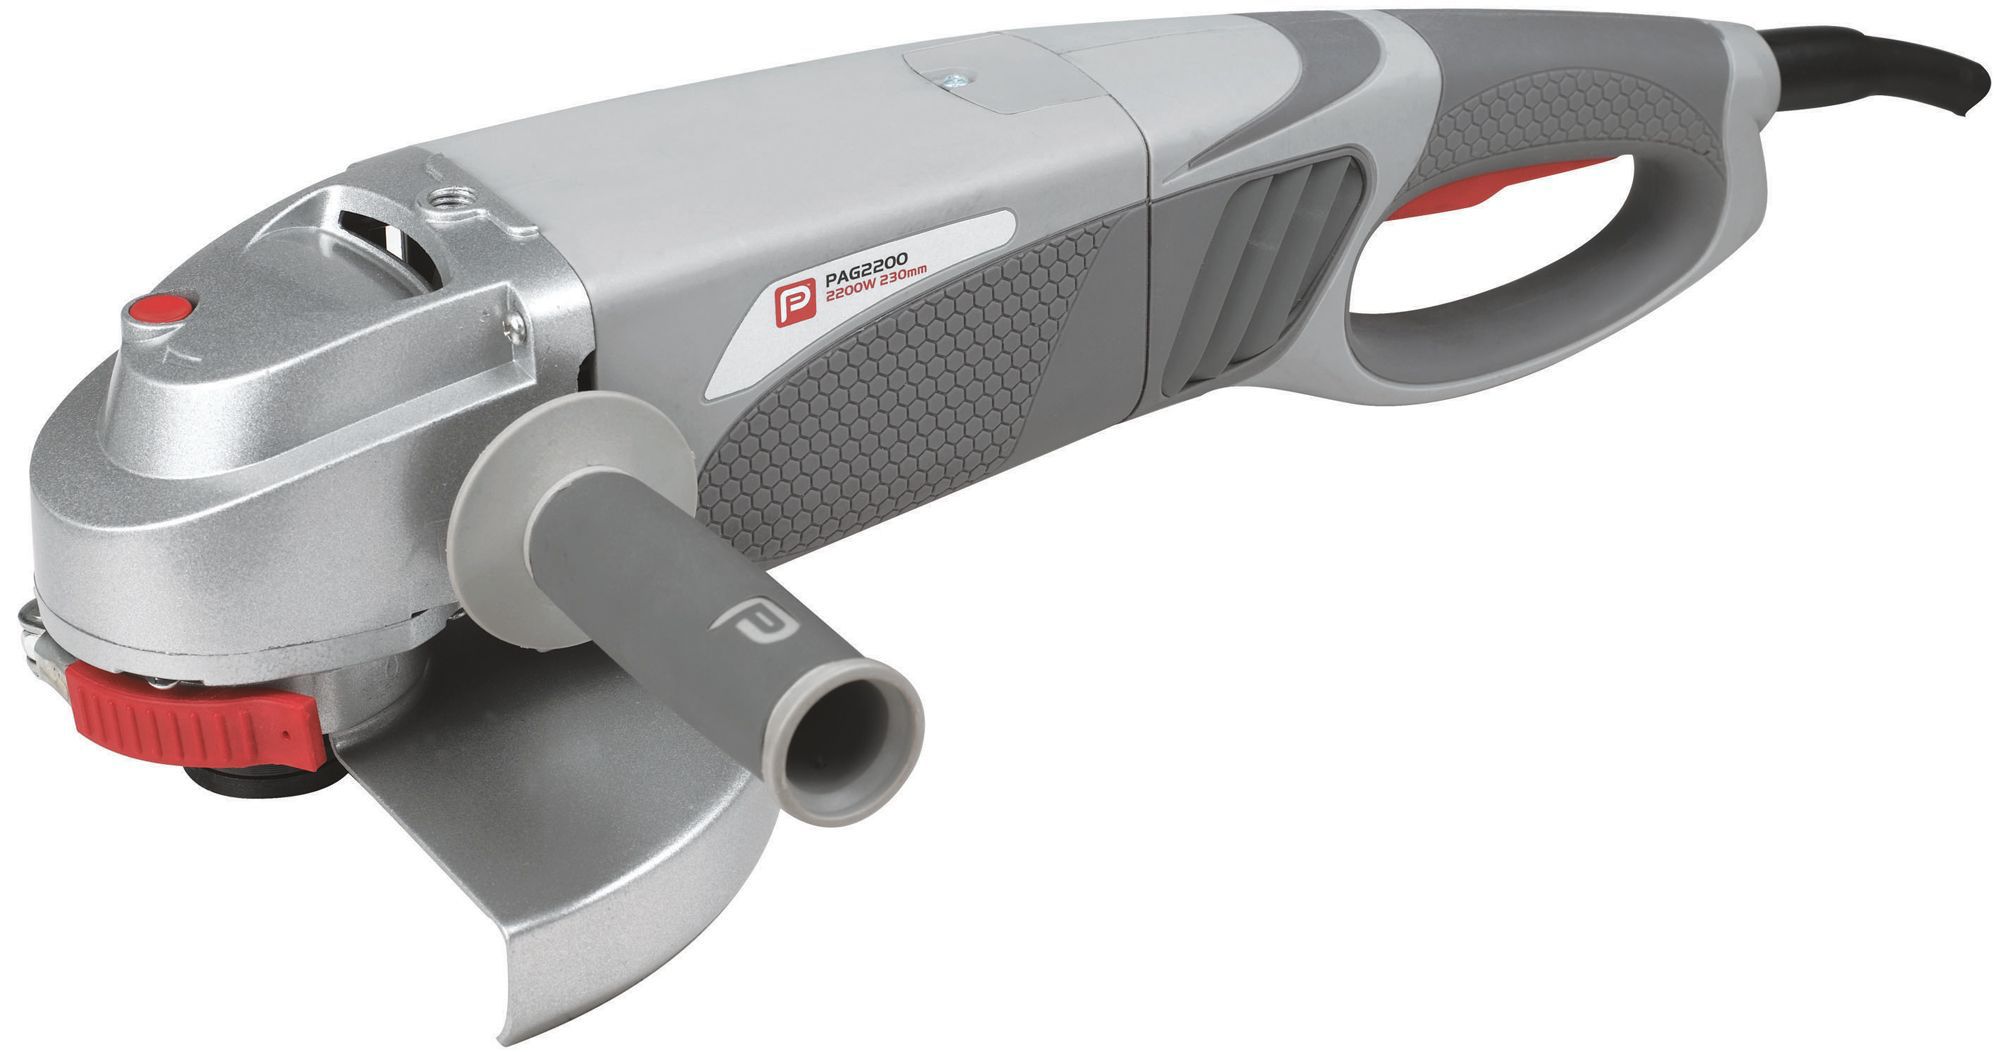 Performance Power 2200w 230v 228 6mm Angle Grinder Pag2200a